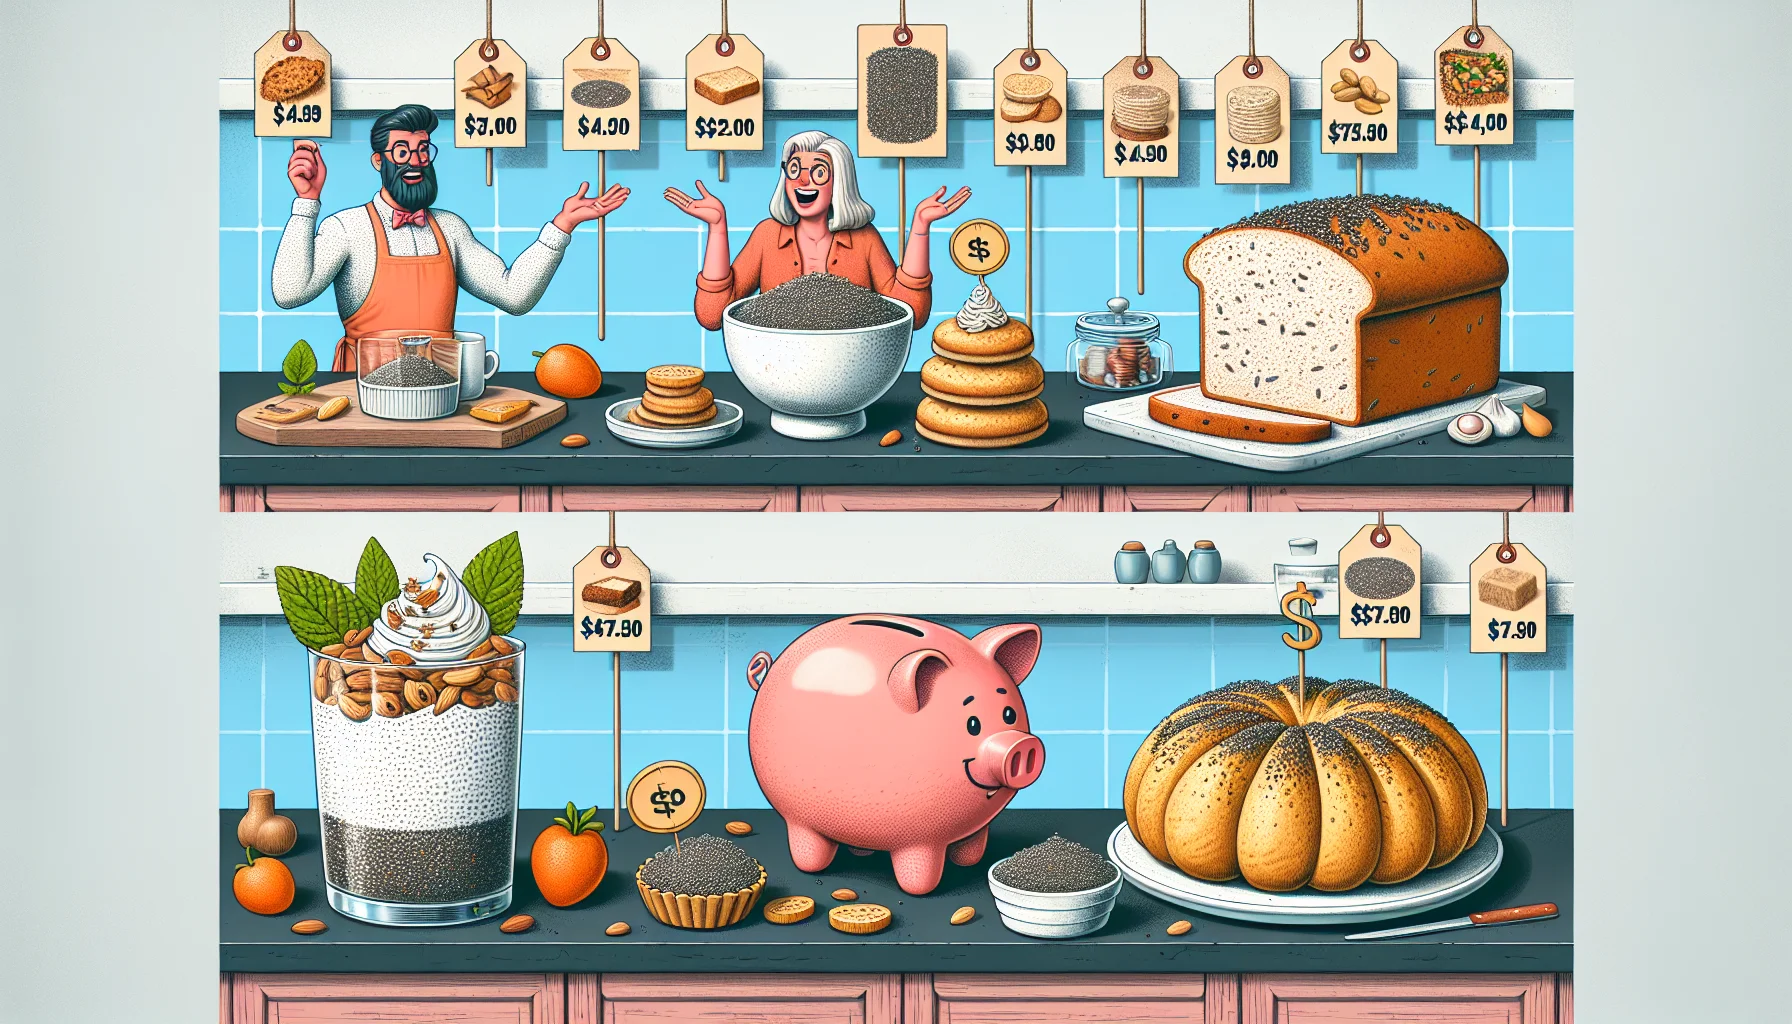 Create an image that portrays a humorous situation showcasing various chia seed recipes suitable for a keto diet. Show different food items such as chia seed pudding, keto-friendly bread infused with chia seeds, and a crustless chia seed pie arranged in a charming kitchen setting. To emphasize the affordability of these dishes, include elements like price tags showing low prices, or a piggy bank sitting on the countertop. Encourage healthy eating by showing people of different genders and descents enjoying the food with wide grins on their faces, exchanging light-hearted and enjoyable conversations.